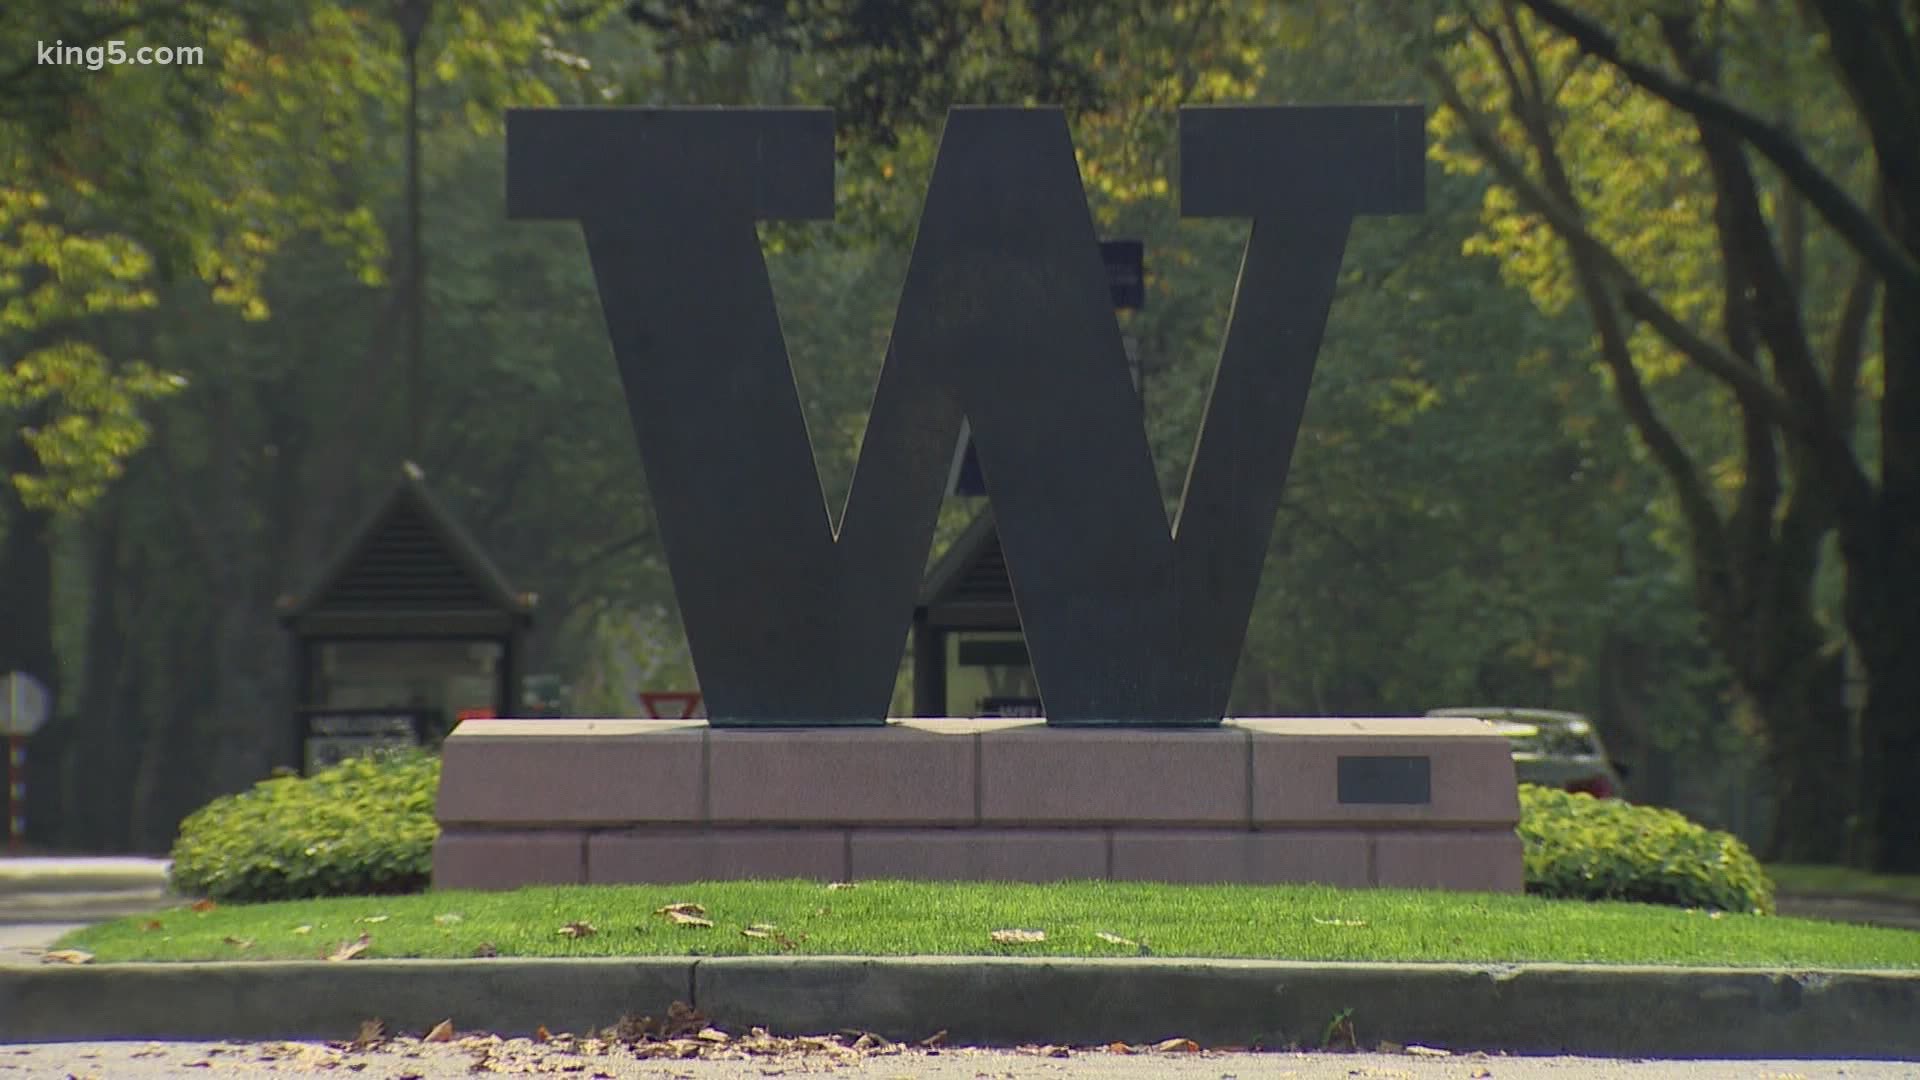 "Case counts have increased rapidly over the last several days," UW officials wrote in a letter addressed to fraternity and sorority members on its website.